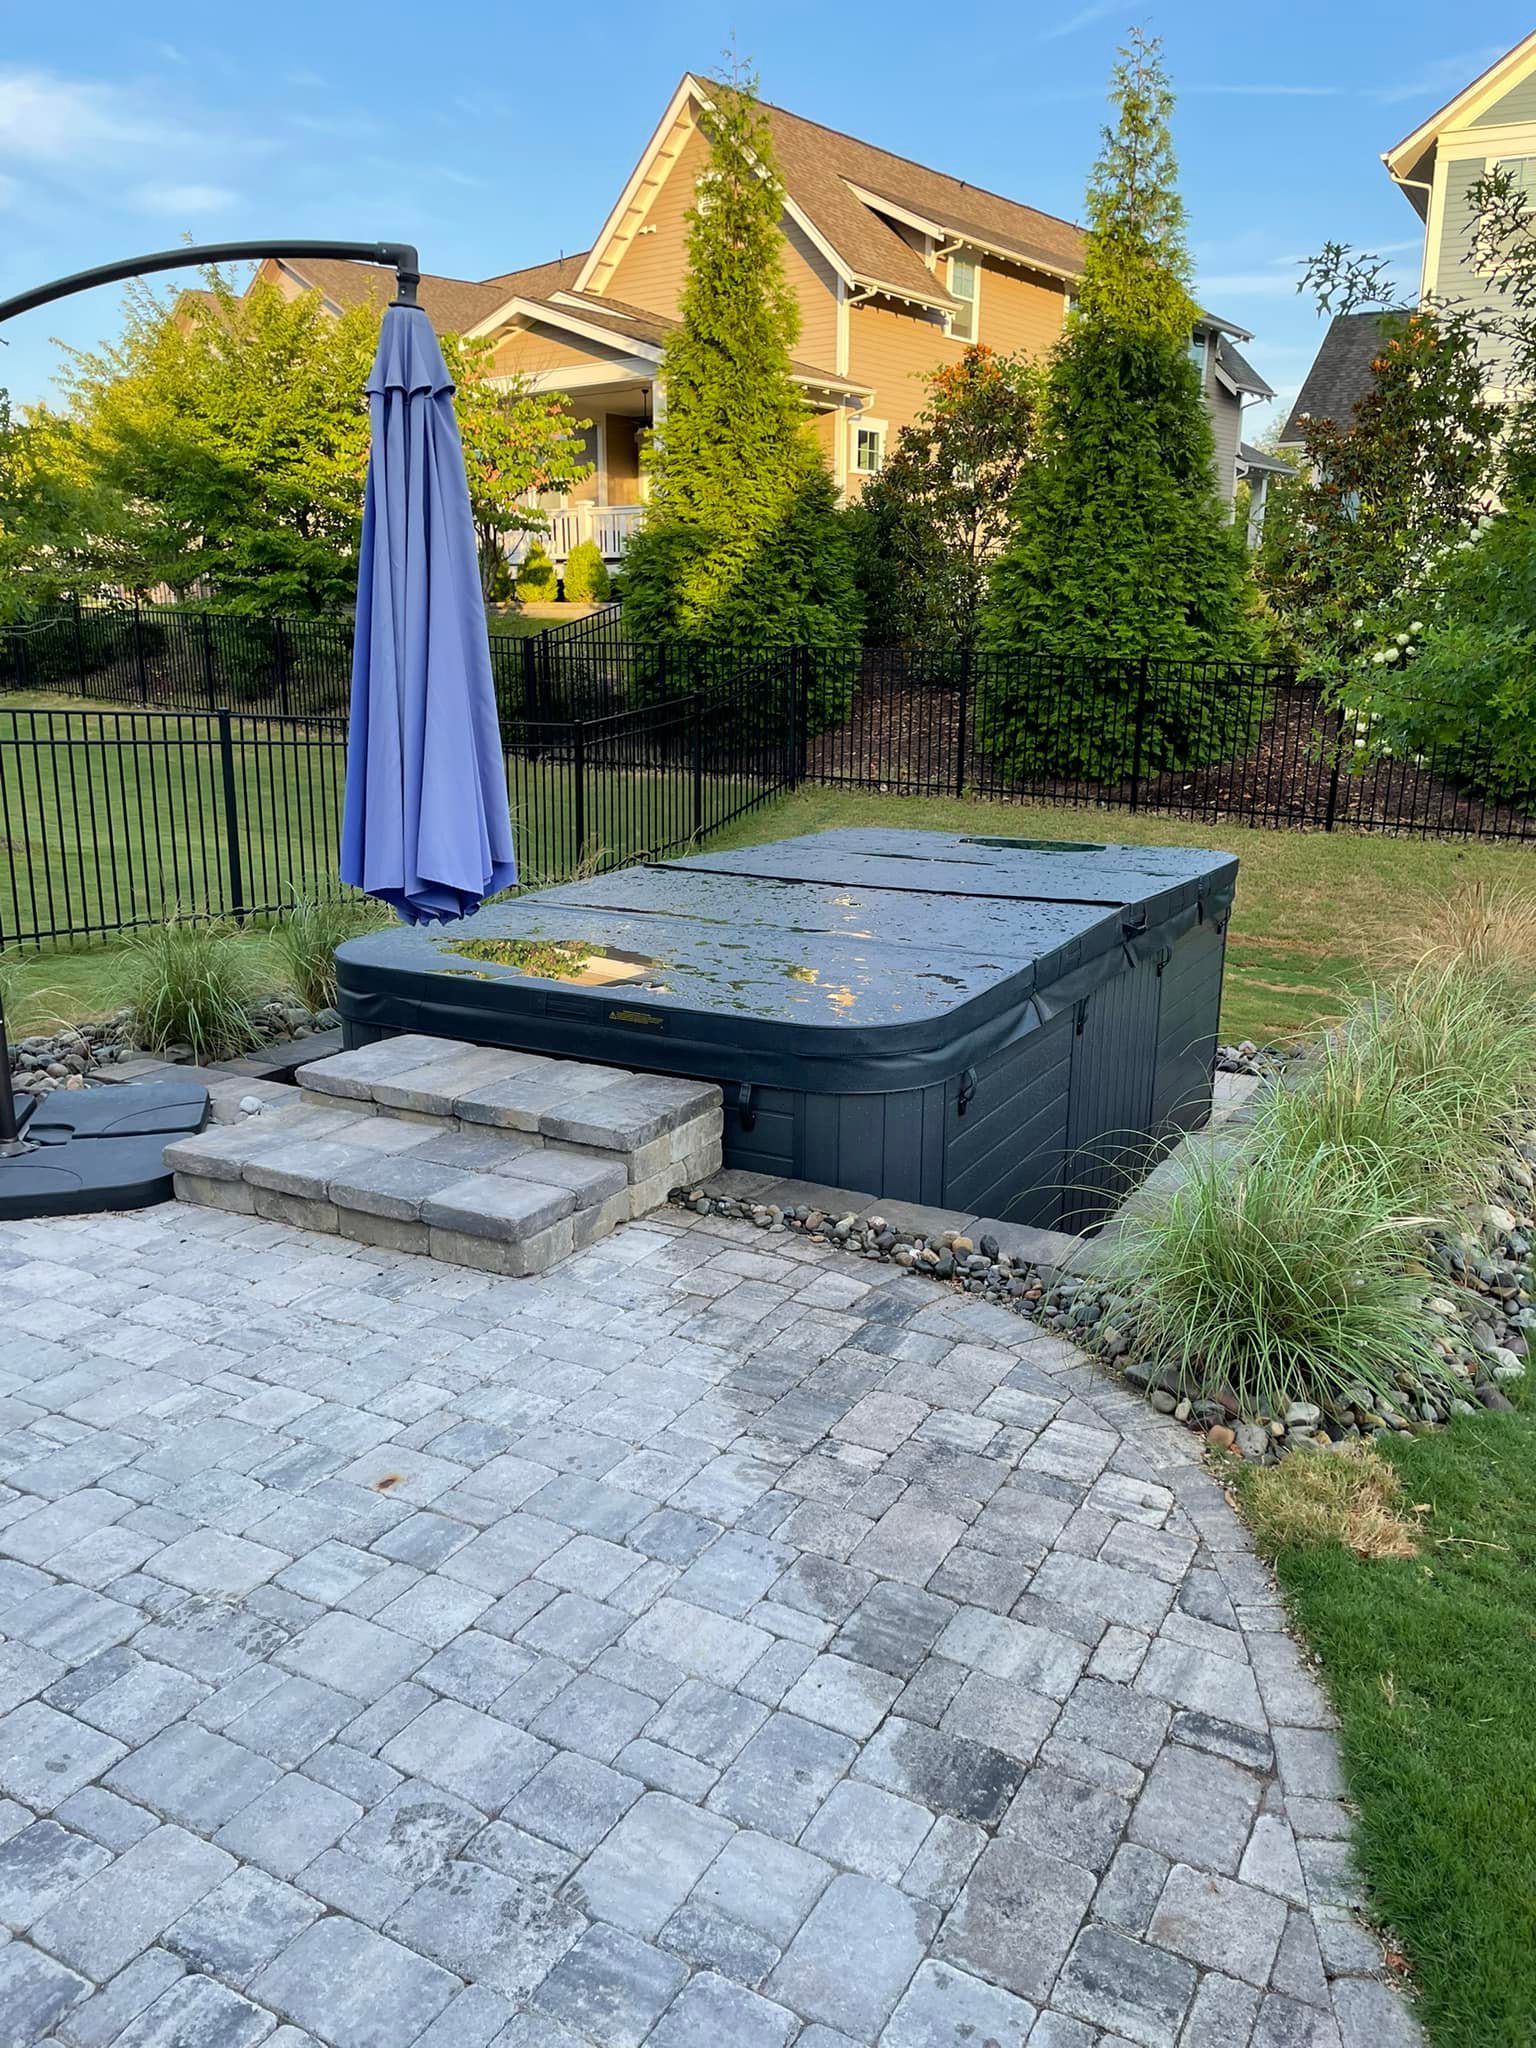 Paver Patio and Retaining Wall for a Spa – Outdoor Living Tip of the Day